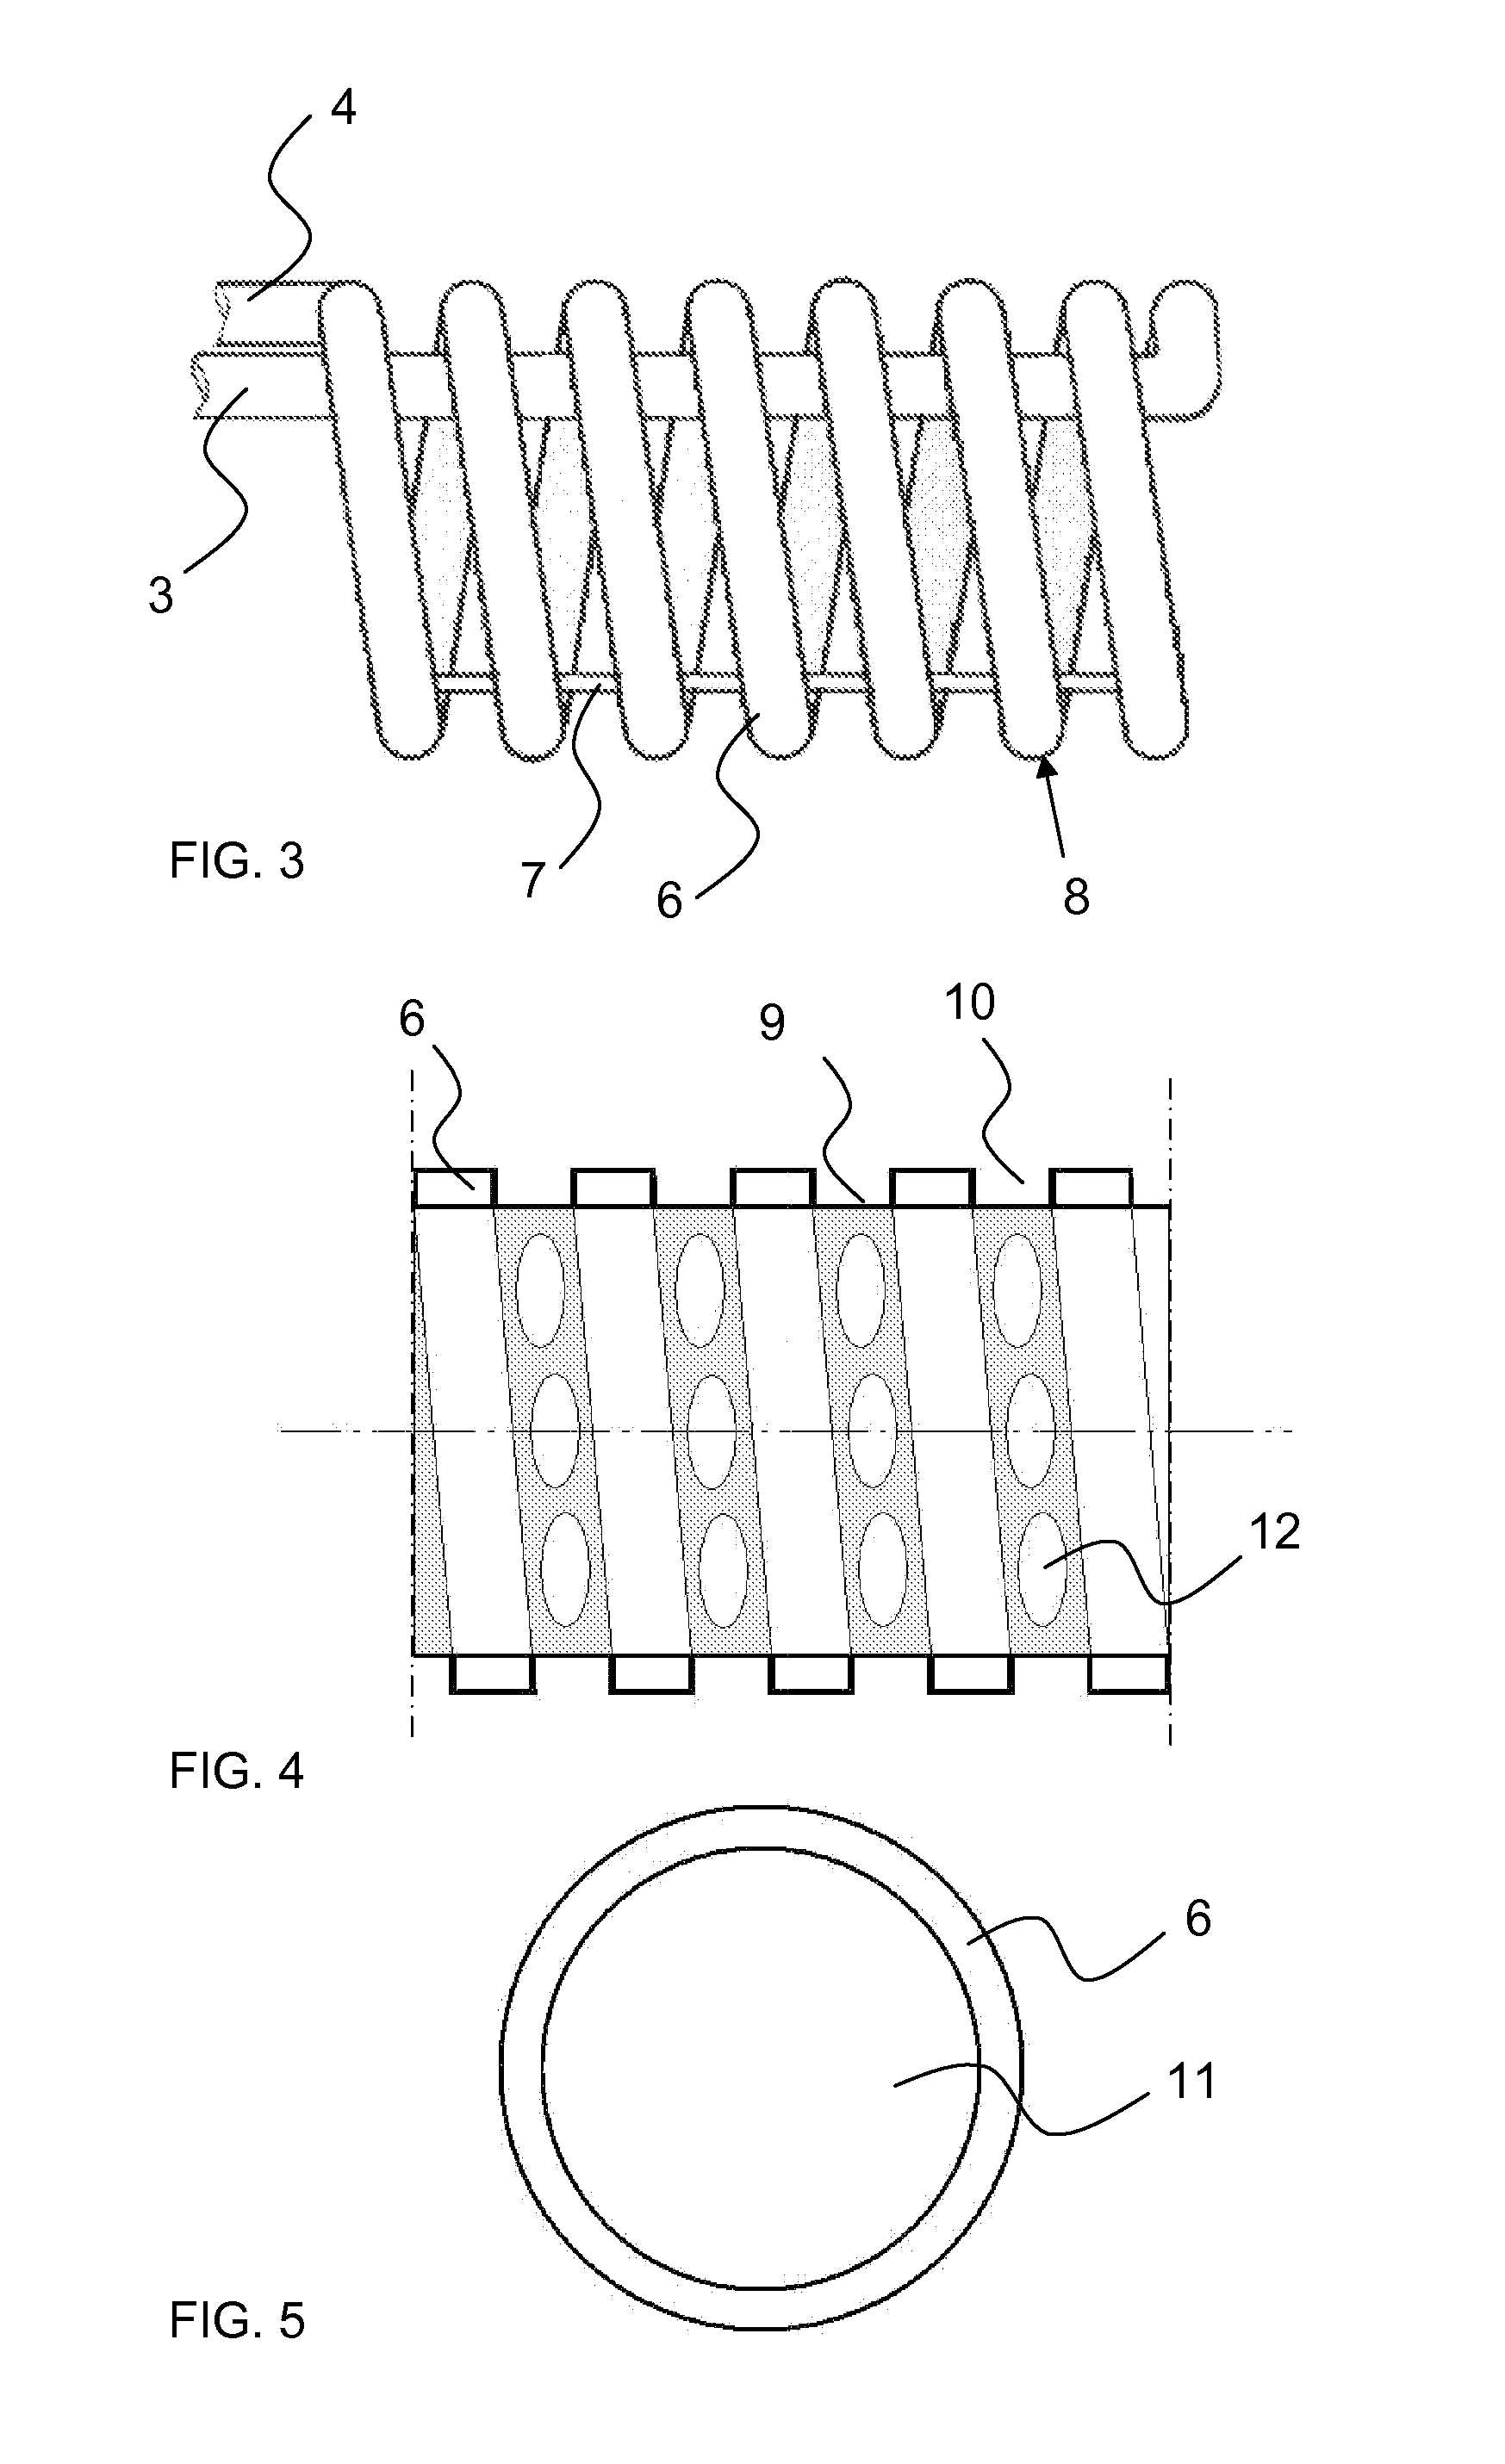 Ground circuit in a low-energy system